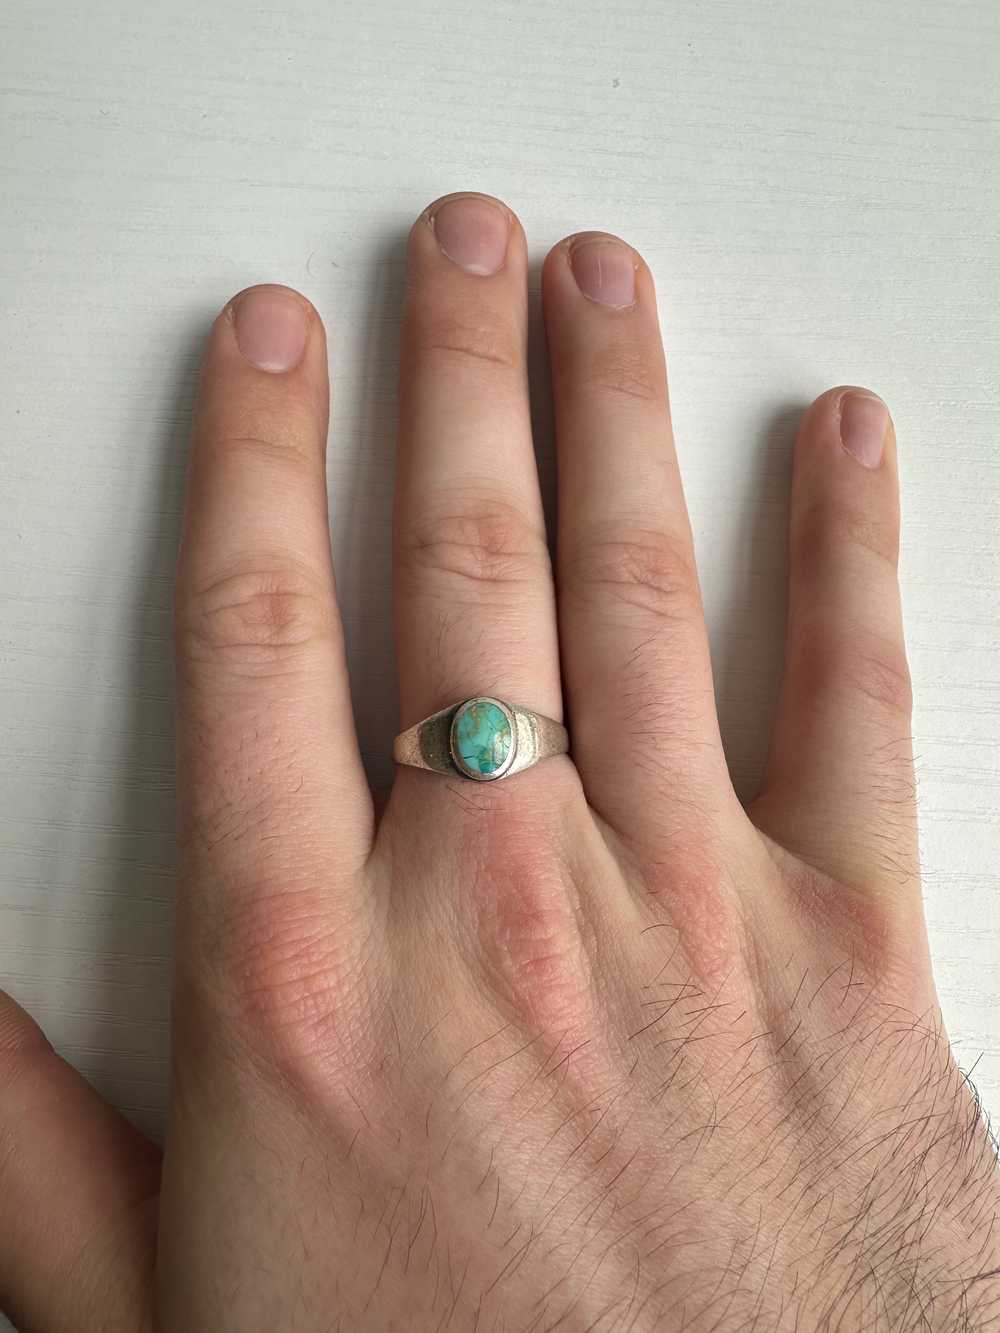 Vintage Sterling Silver & Turquoise Ring Size 12 - image 2